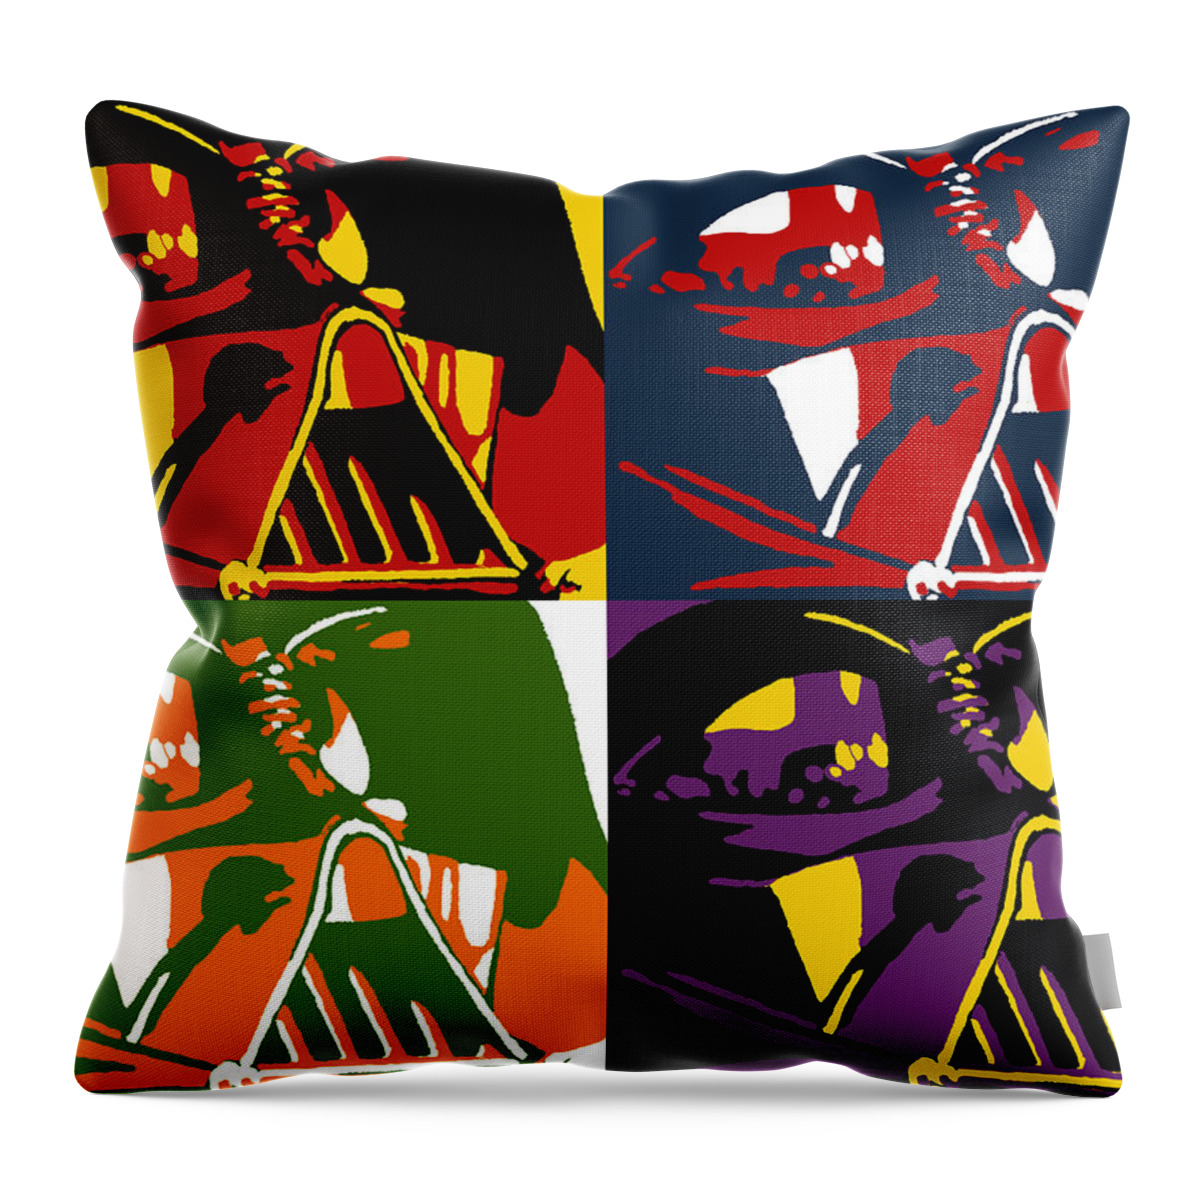 Star Wars Throw Pillow featuring the painting Pop Art Vader by Dale Loos Jr